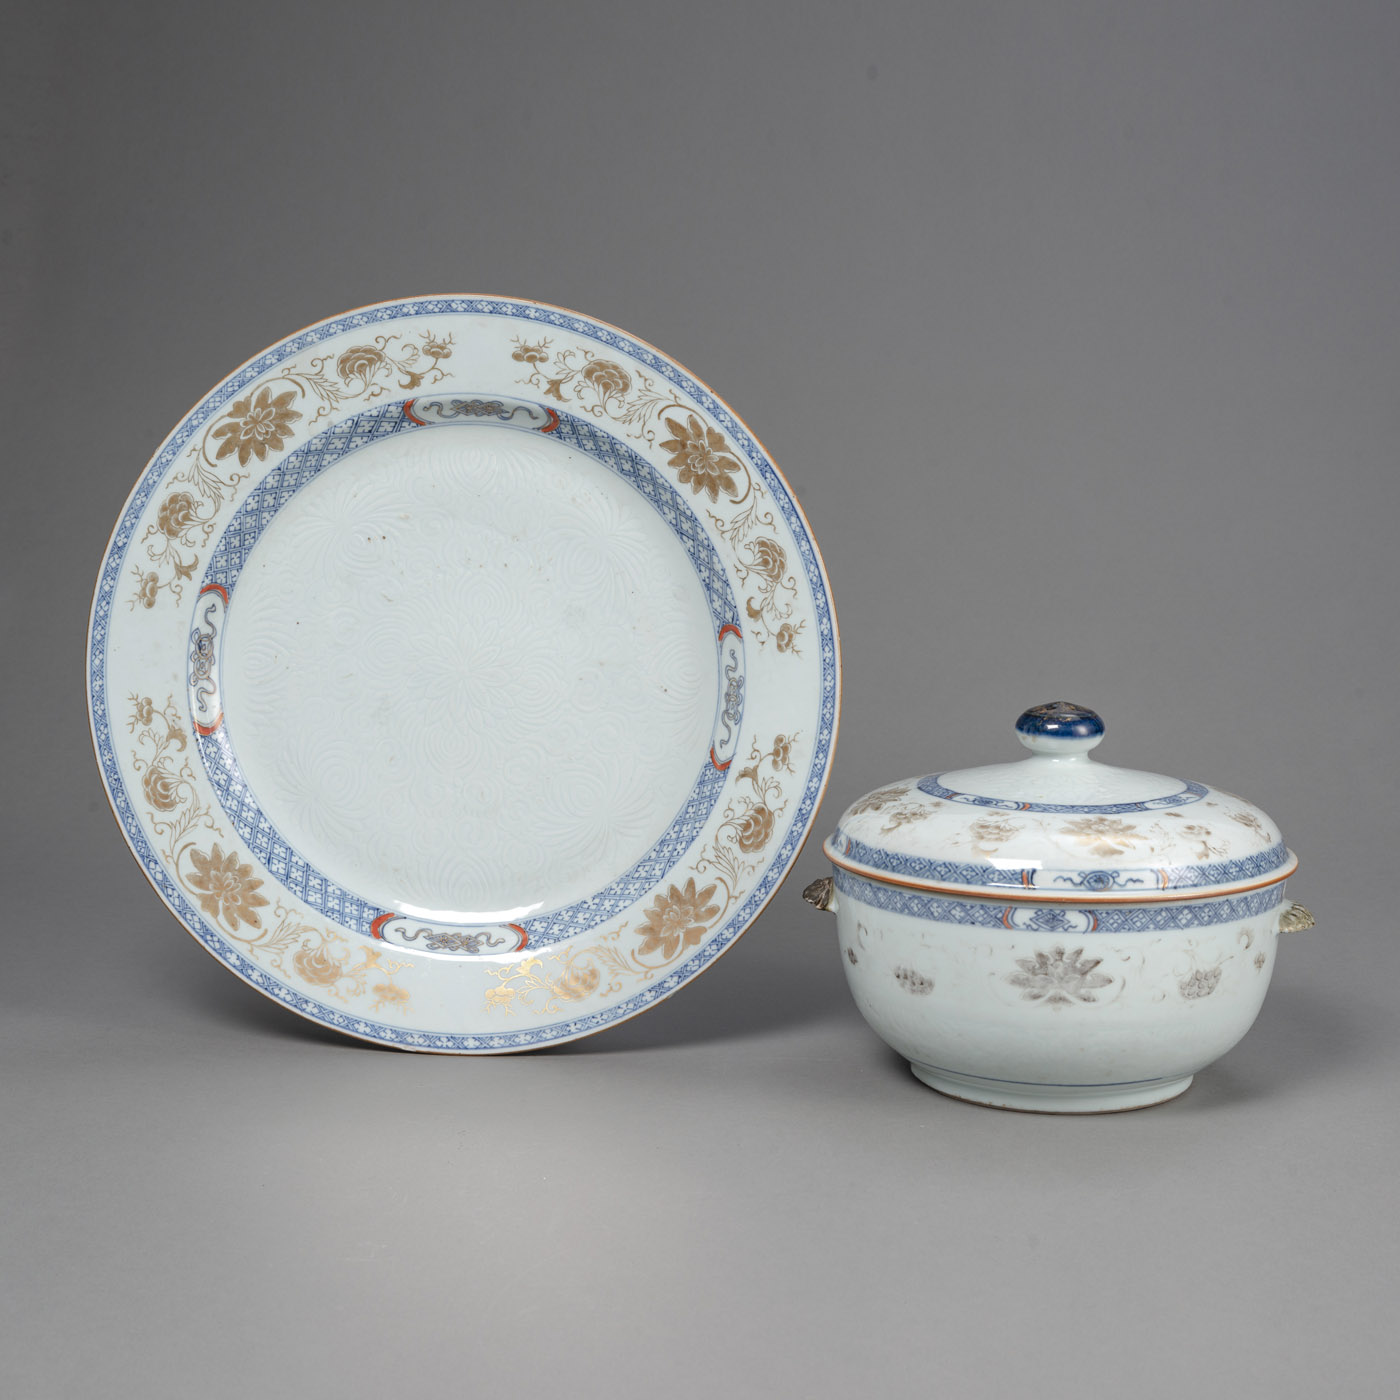 <b>AN UNDERGLAZE BLUE AND GOLD EXPORT PORCELAIN CHARGER WITH CARVED LOTUS AND A TUREEN</b>